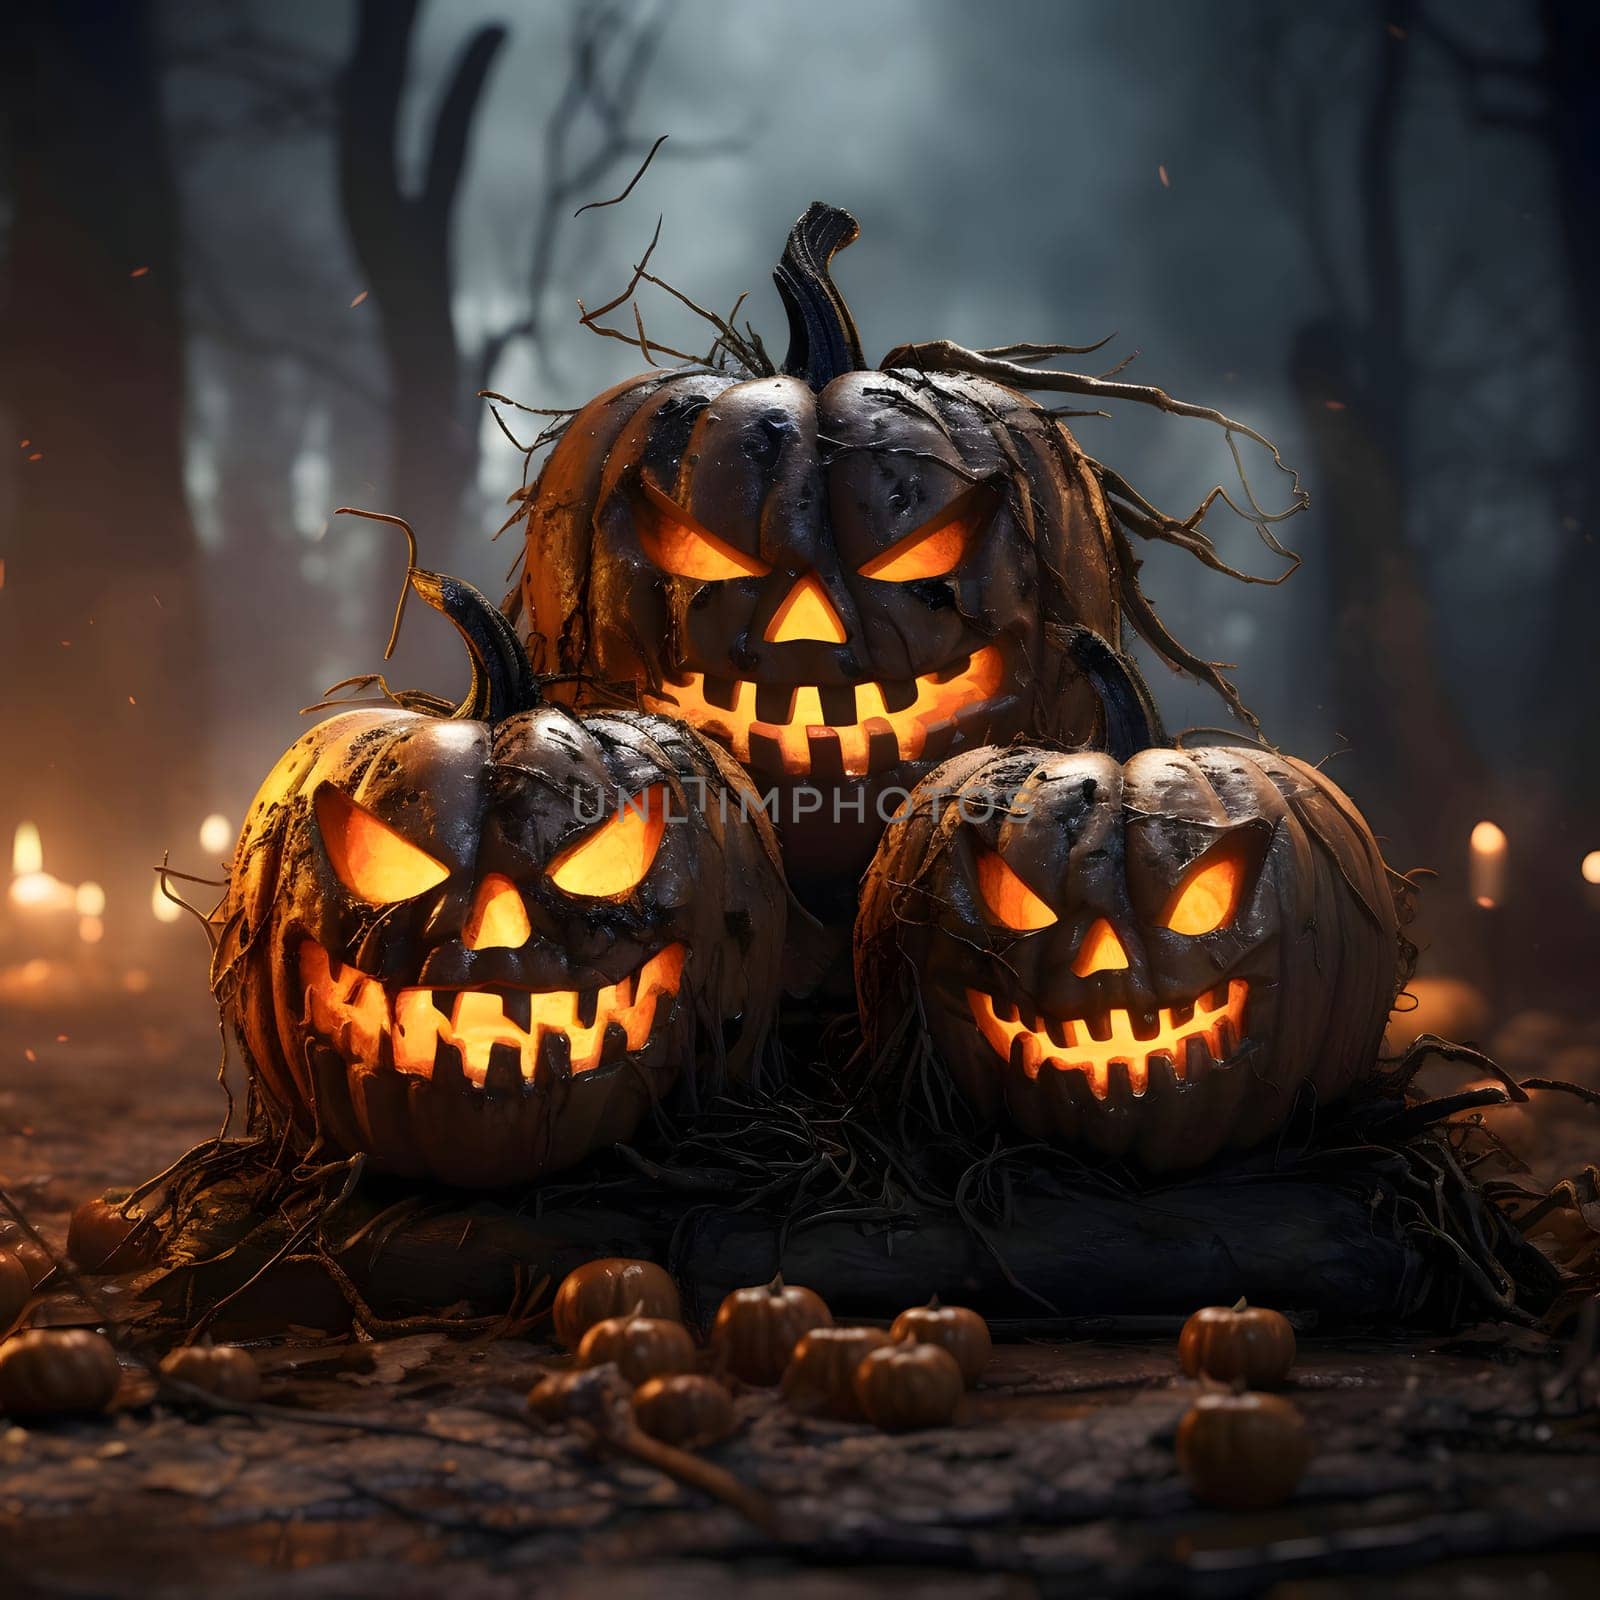 Three jack-o-lantern pumpkins glowing on a dark blurry background, a Halloween image. Atmosphere of darkness and fear.